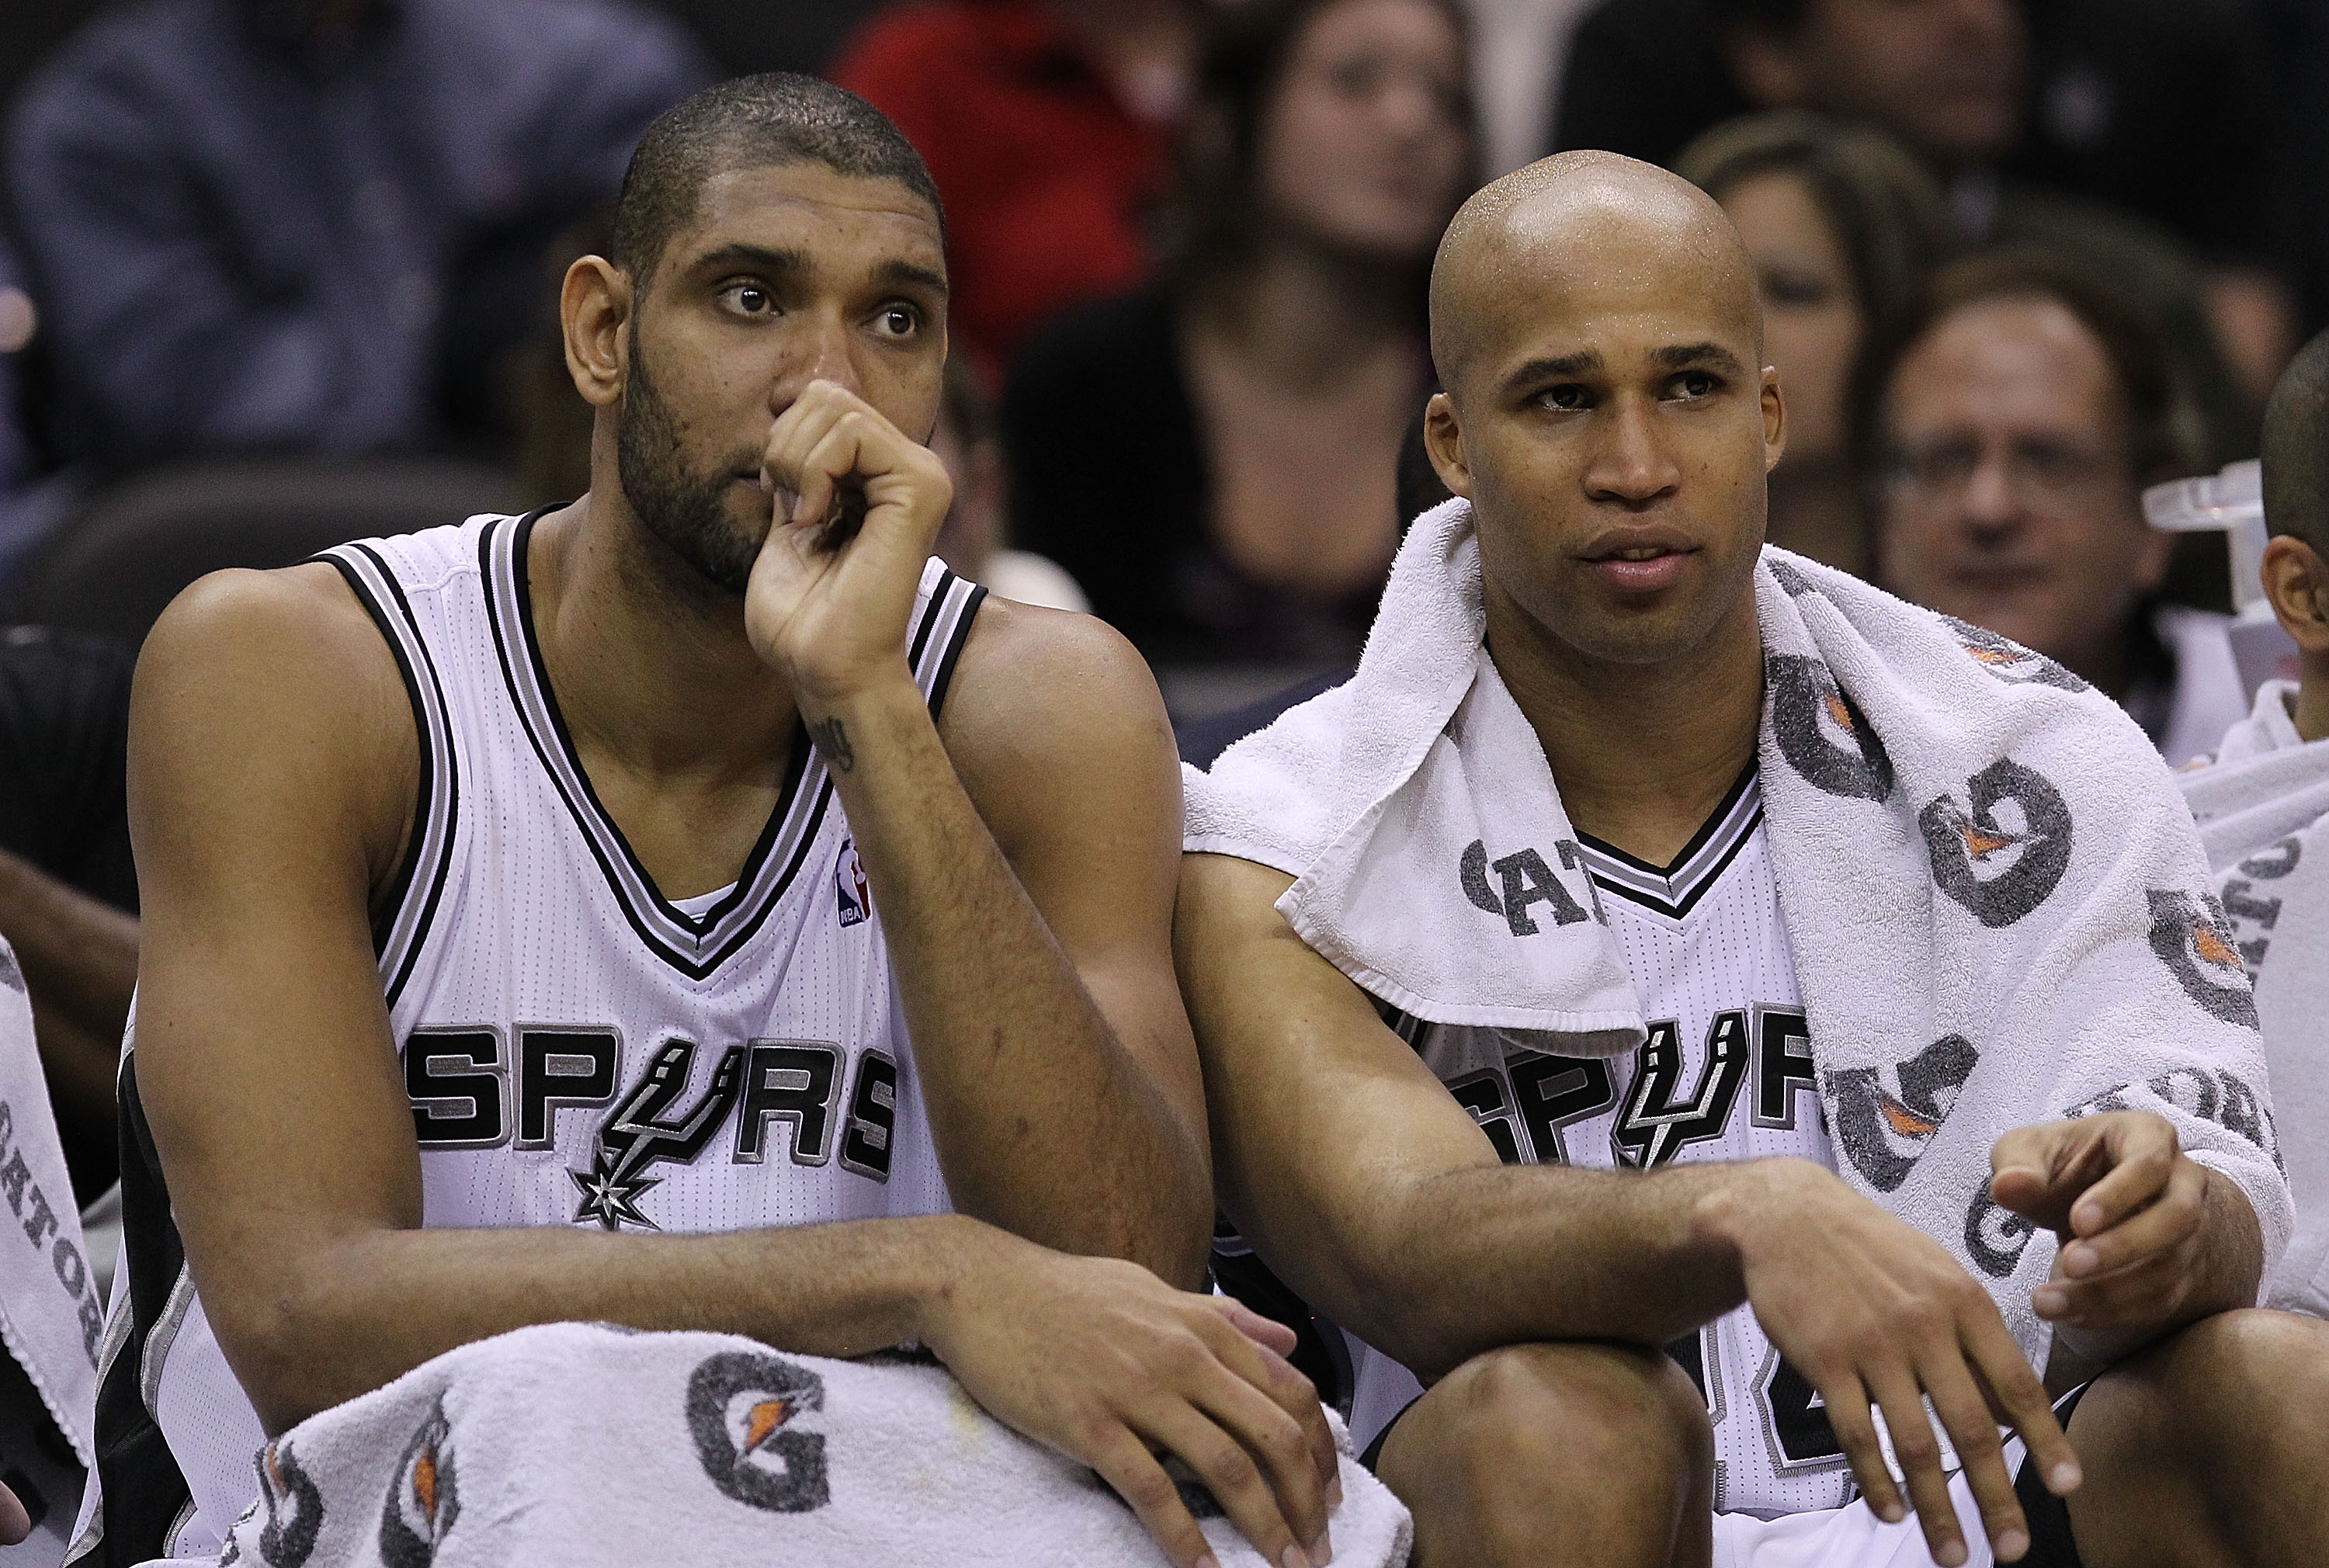 SAN ANTONIO, TX - DECEMBER 28: Tim Duncan #21 and Richard Jefferson #24 of the San Antonio Spurs during play against the Los Angeles Lakers at AT&T Center on December 28, 2010 in San Antonio, Texas.  NOTE TO USER: User expressly acknowledges and agrees th